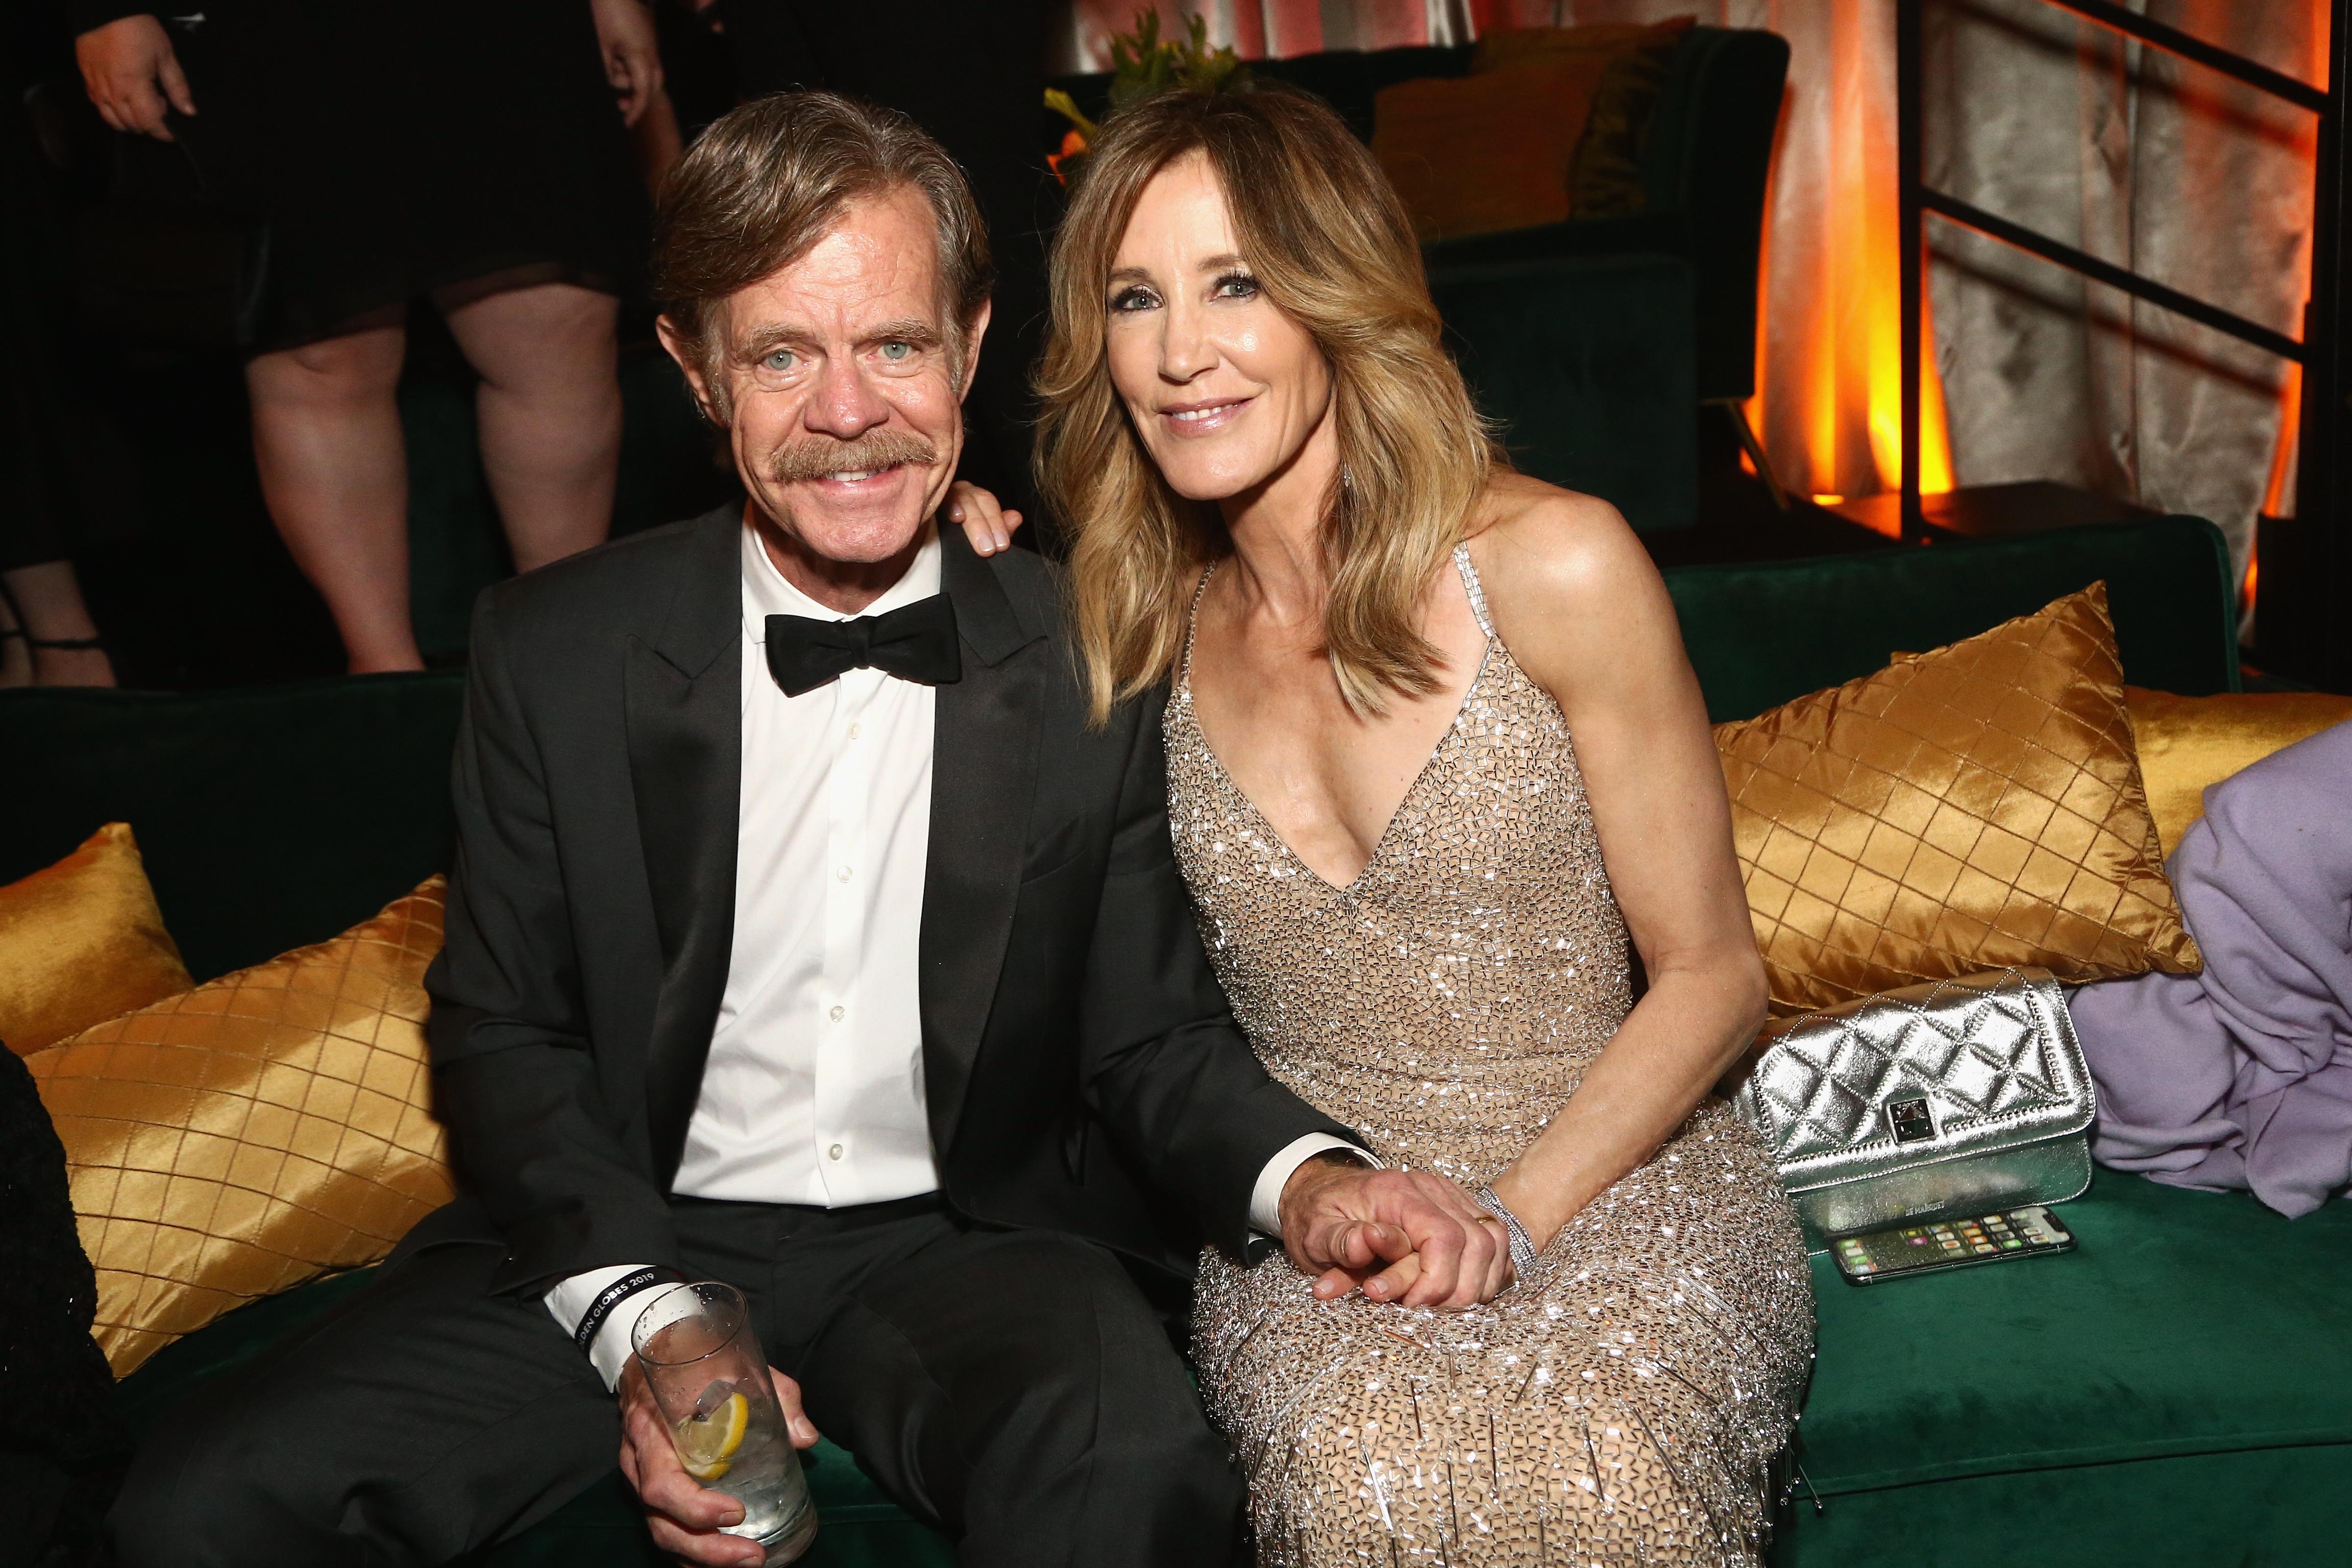 Felicity Huffman Already Out Of Prison After 14-Day Sentence